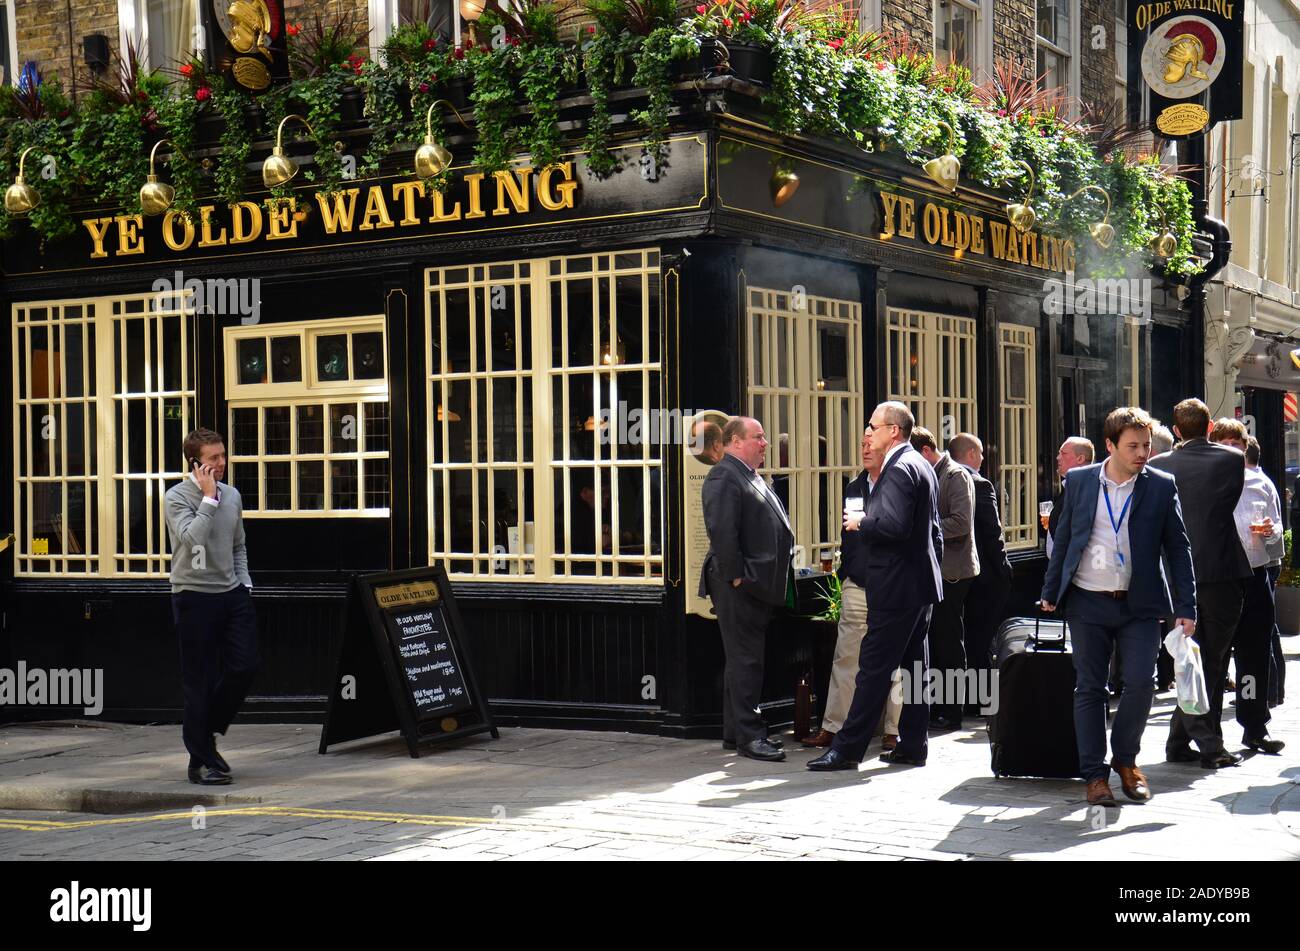 April 2, 2019- London, England, UK - Office workers at lunchtime outside the Ye Olde Watling pub Stock Photo